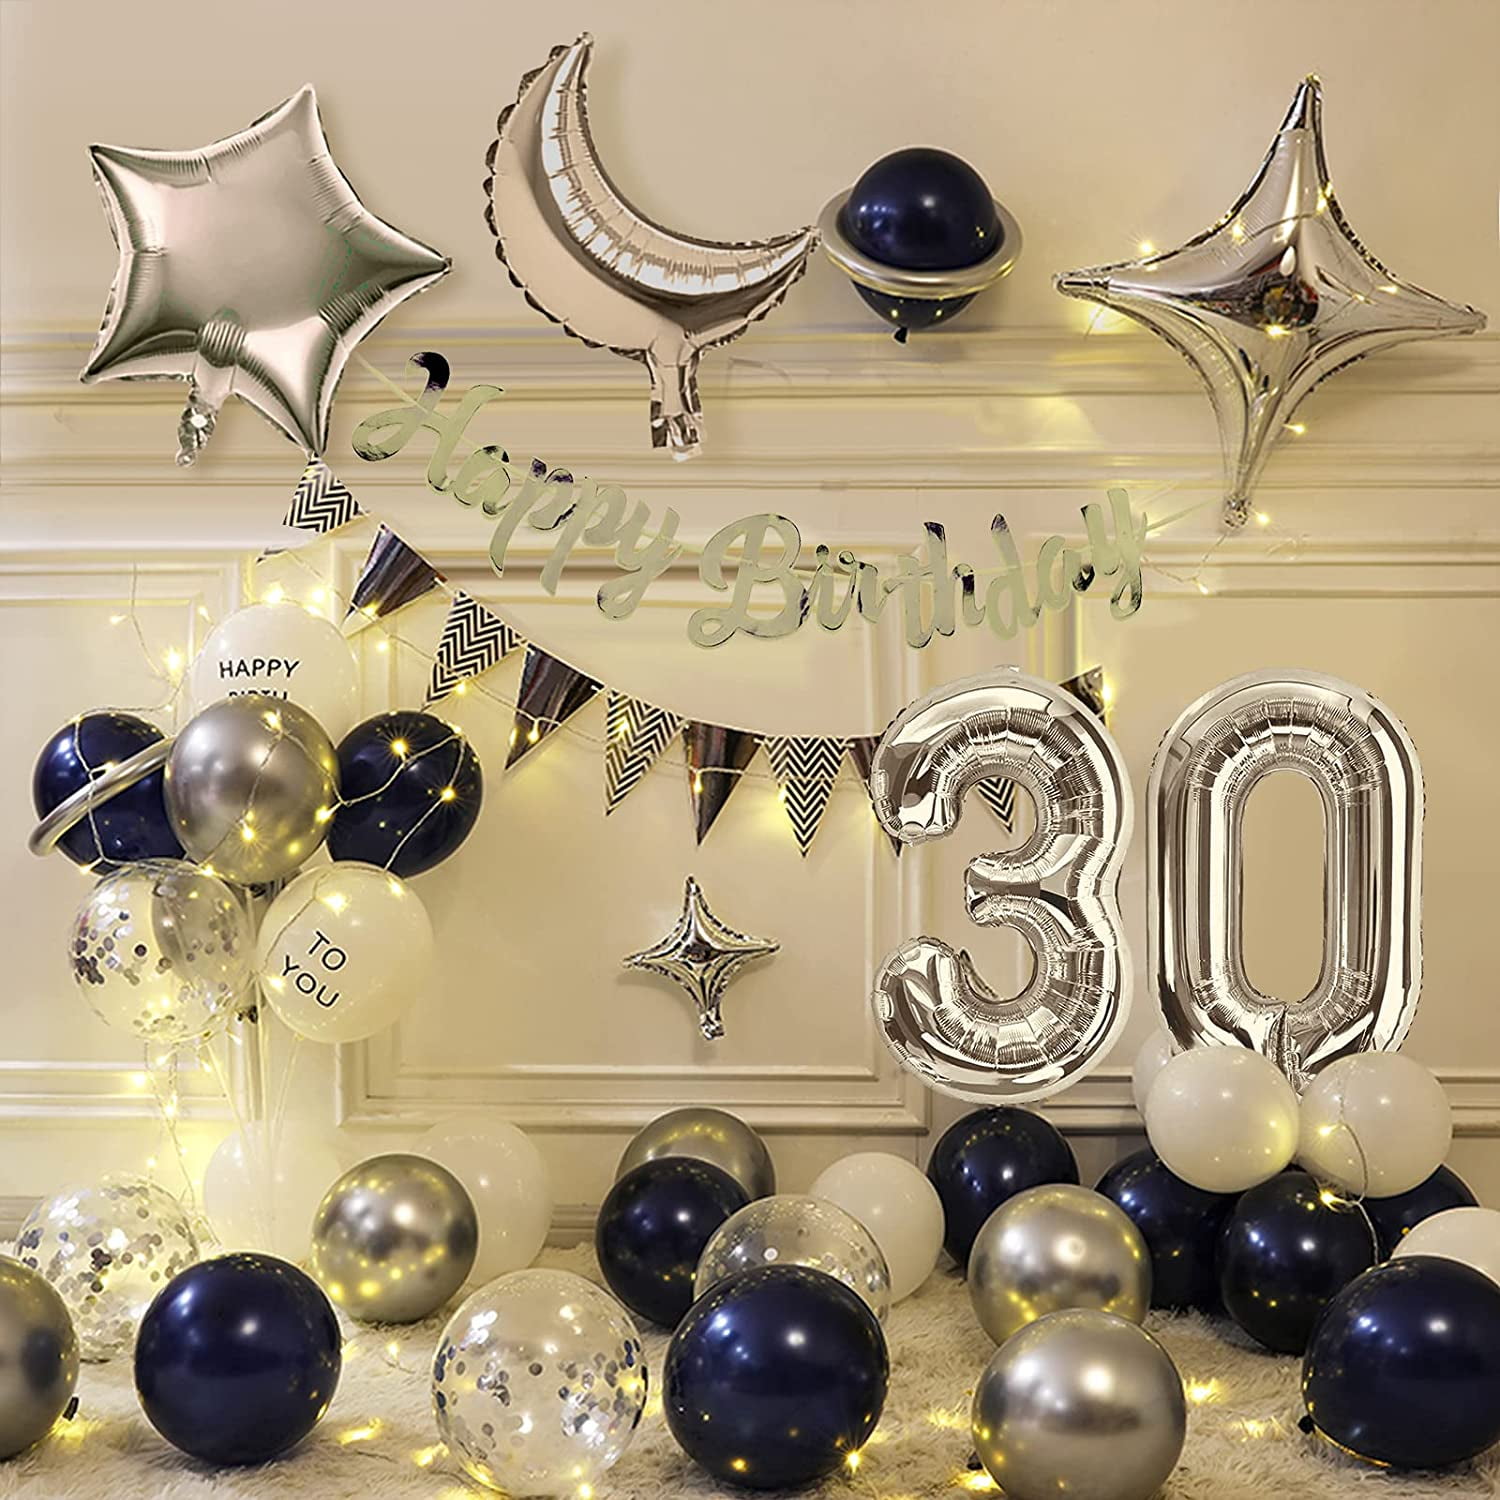 30th Birthday Decorations for Men, 30th Birthday Party Supplies with HAPPY BIRTHDAY Banner and Number 30 Balloon, Silver Navy Blue Theme Party for Him 30 Years Old Birthday Decorations - Walmart.com